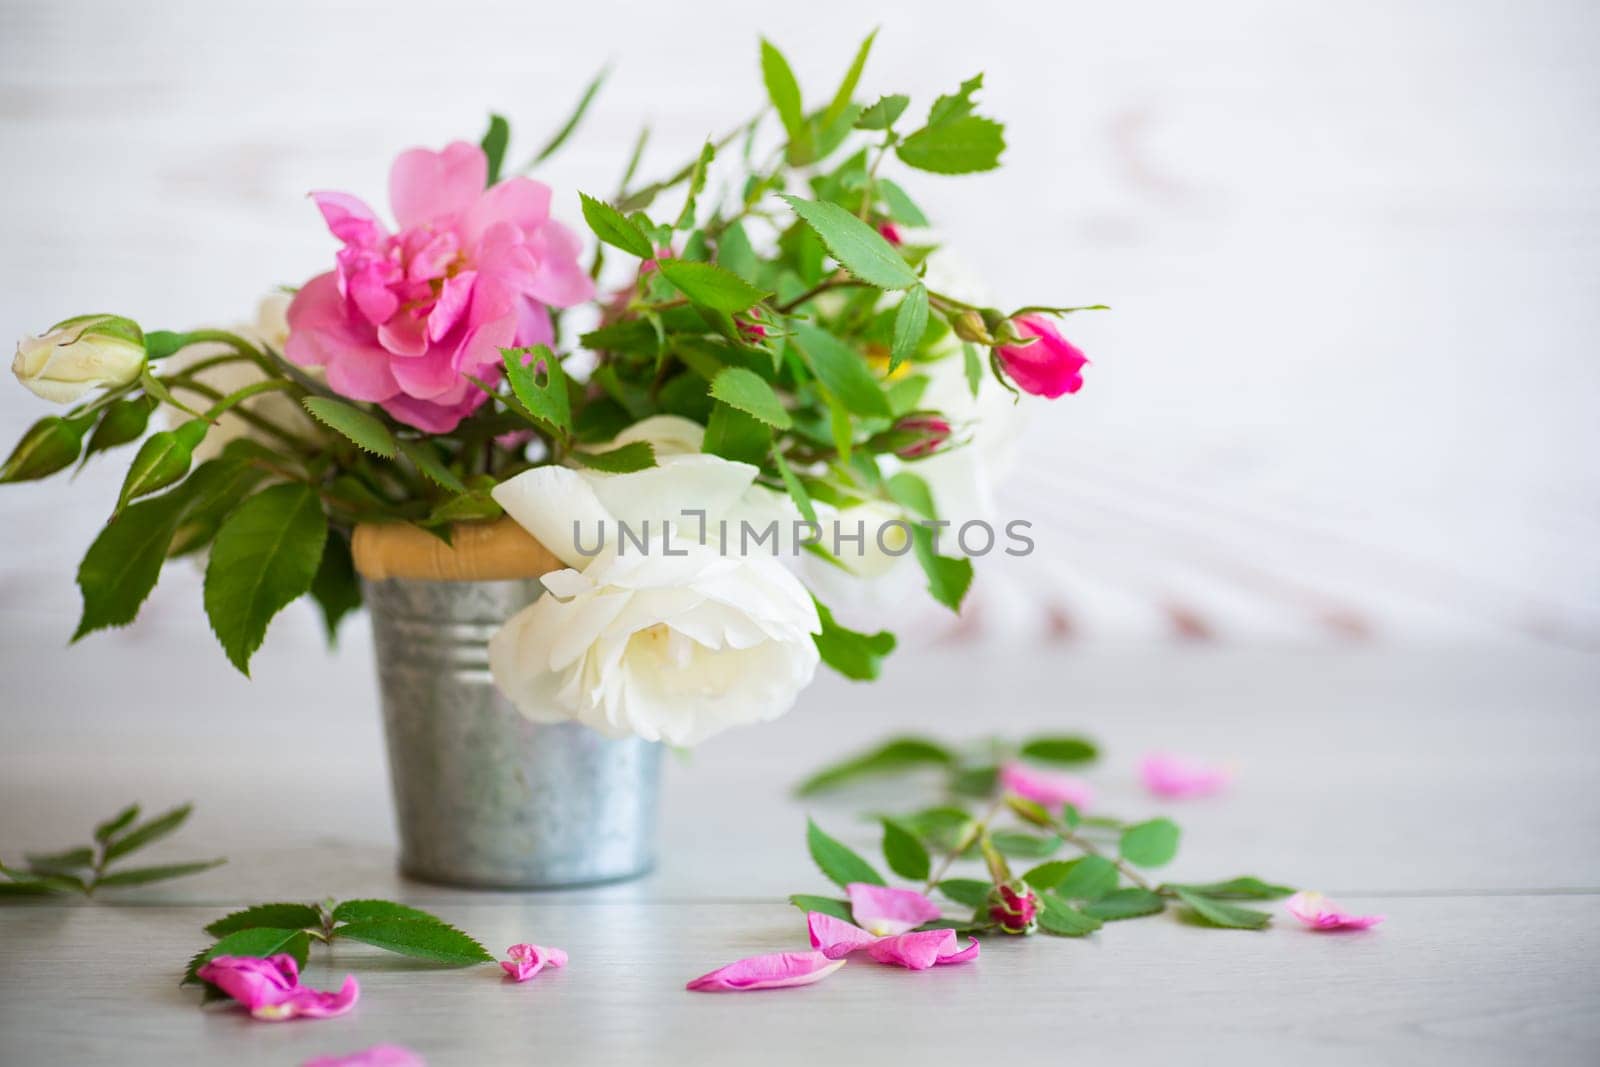 A small bouquet of beautiful summer pink and white roses on a light wooden background.